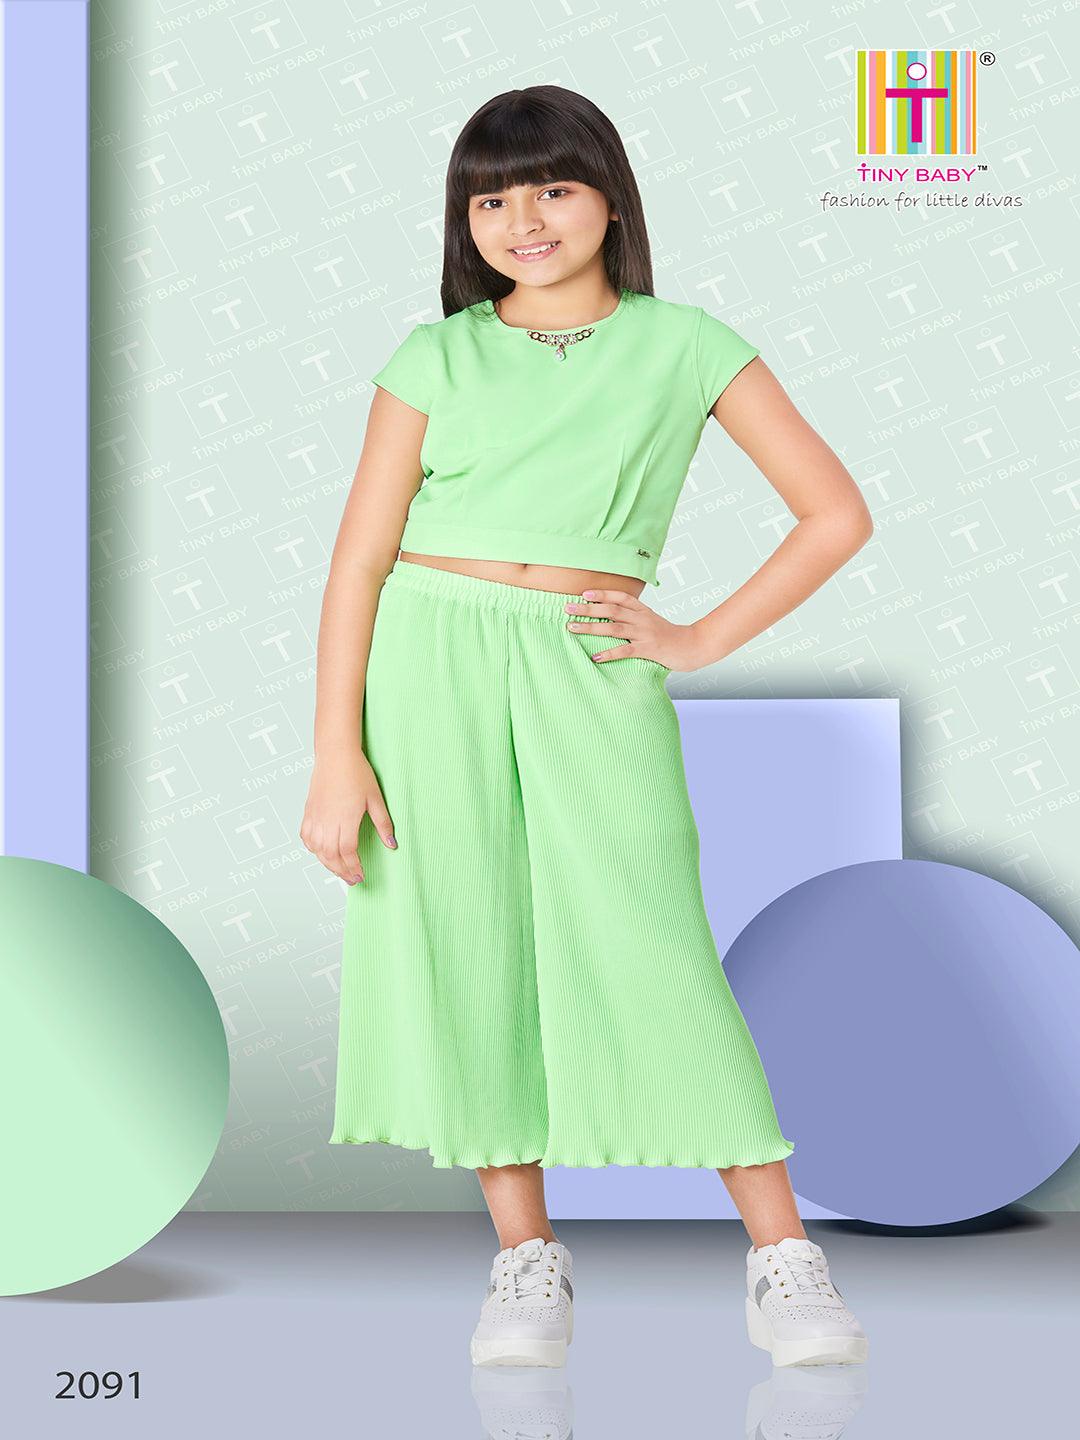 Tiny Baby Sky Blue Colored Culottes- 2091 Neon Green - TINY BABY INDIA shop.tinybaby.in